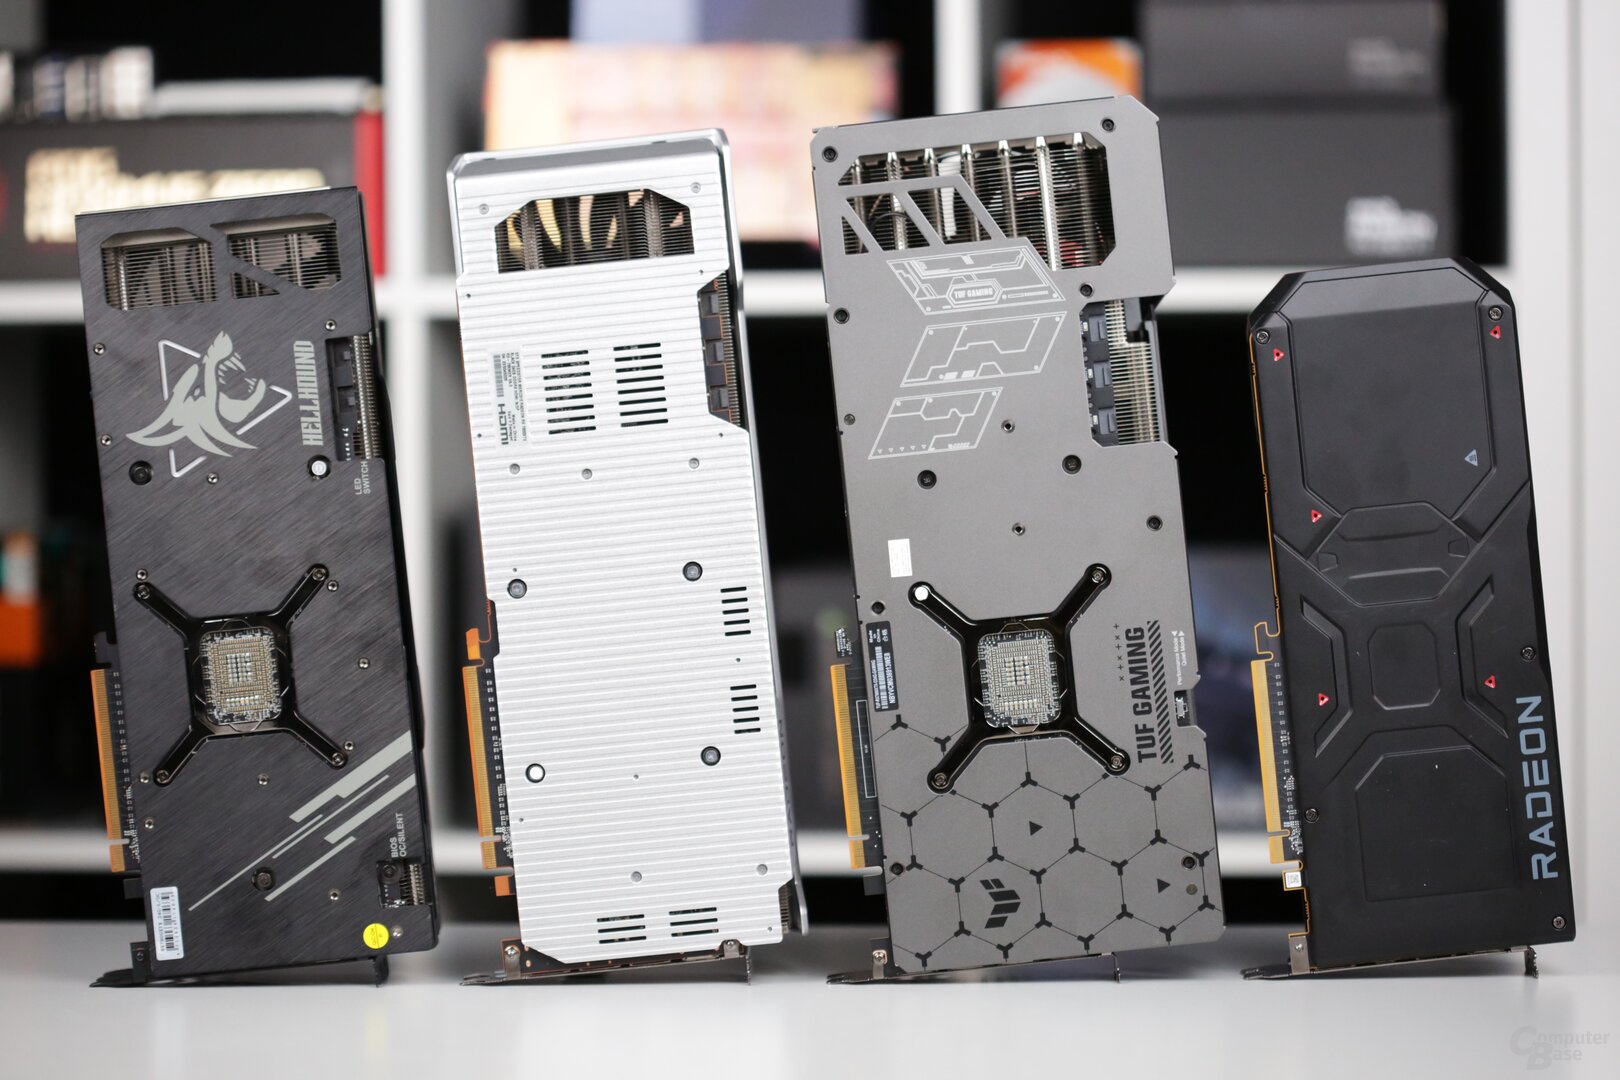 Radeon RX 7900 XTX: PowerColor Hellhound, XFX Merc 310, Asus TUF Gaming and reference design (left to right)